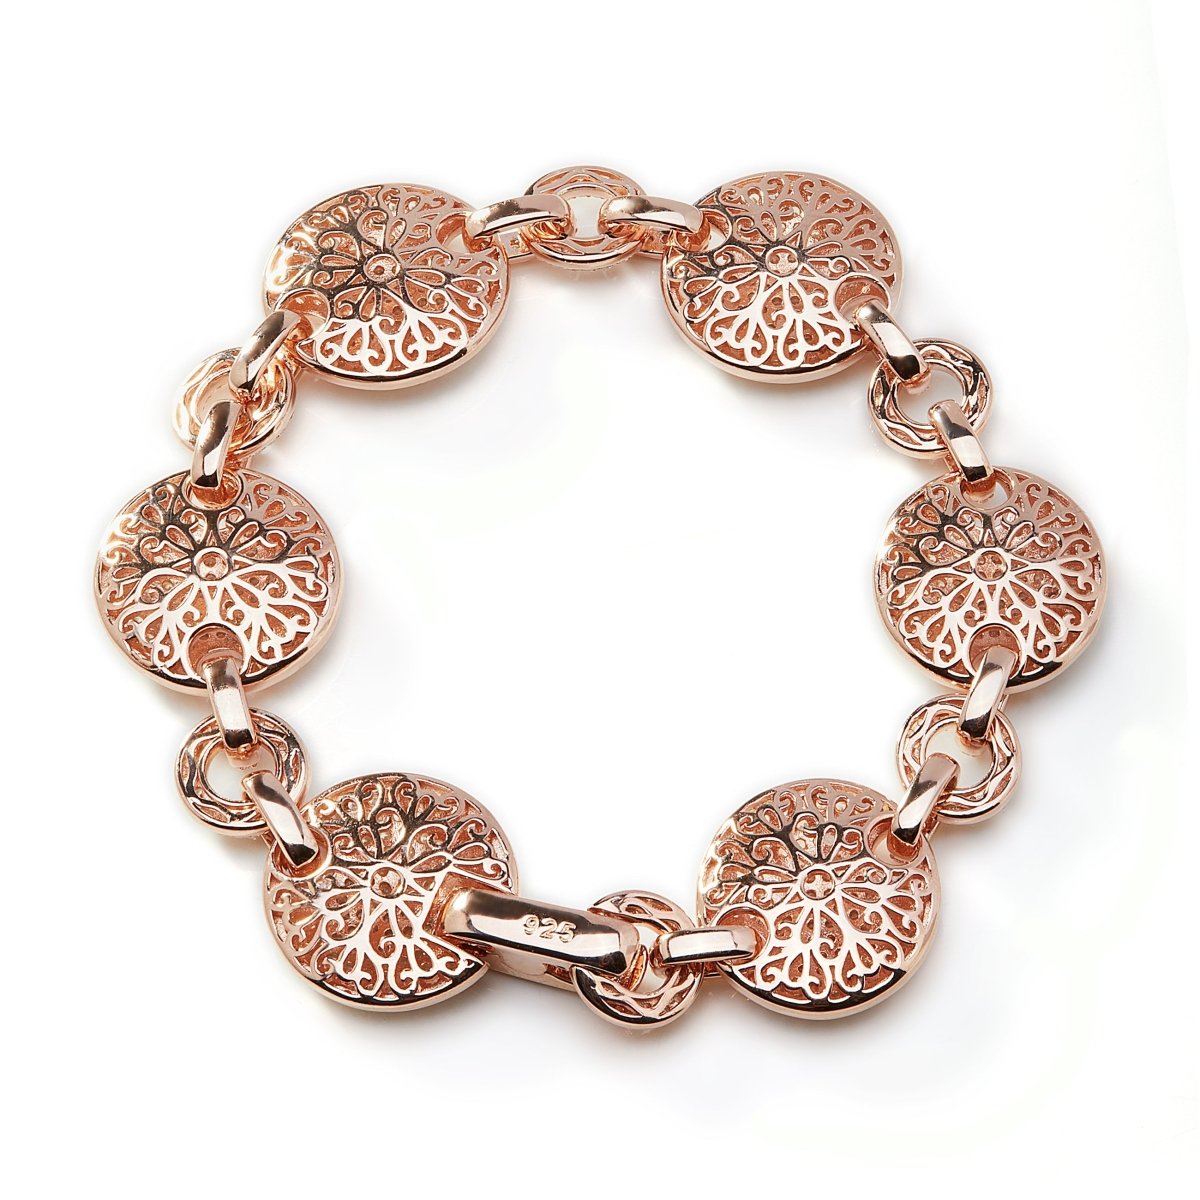 13.30ct Cubic Zirconia Pave Disc Bracelet in 14k Rose Gold Plated Silver